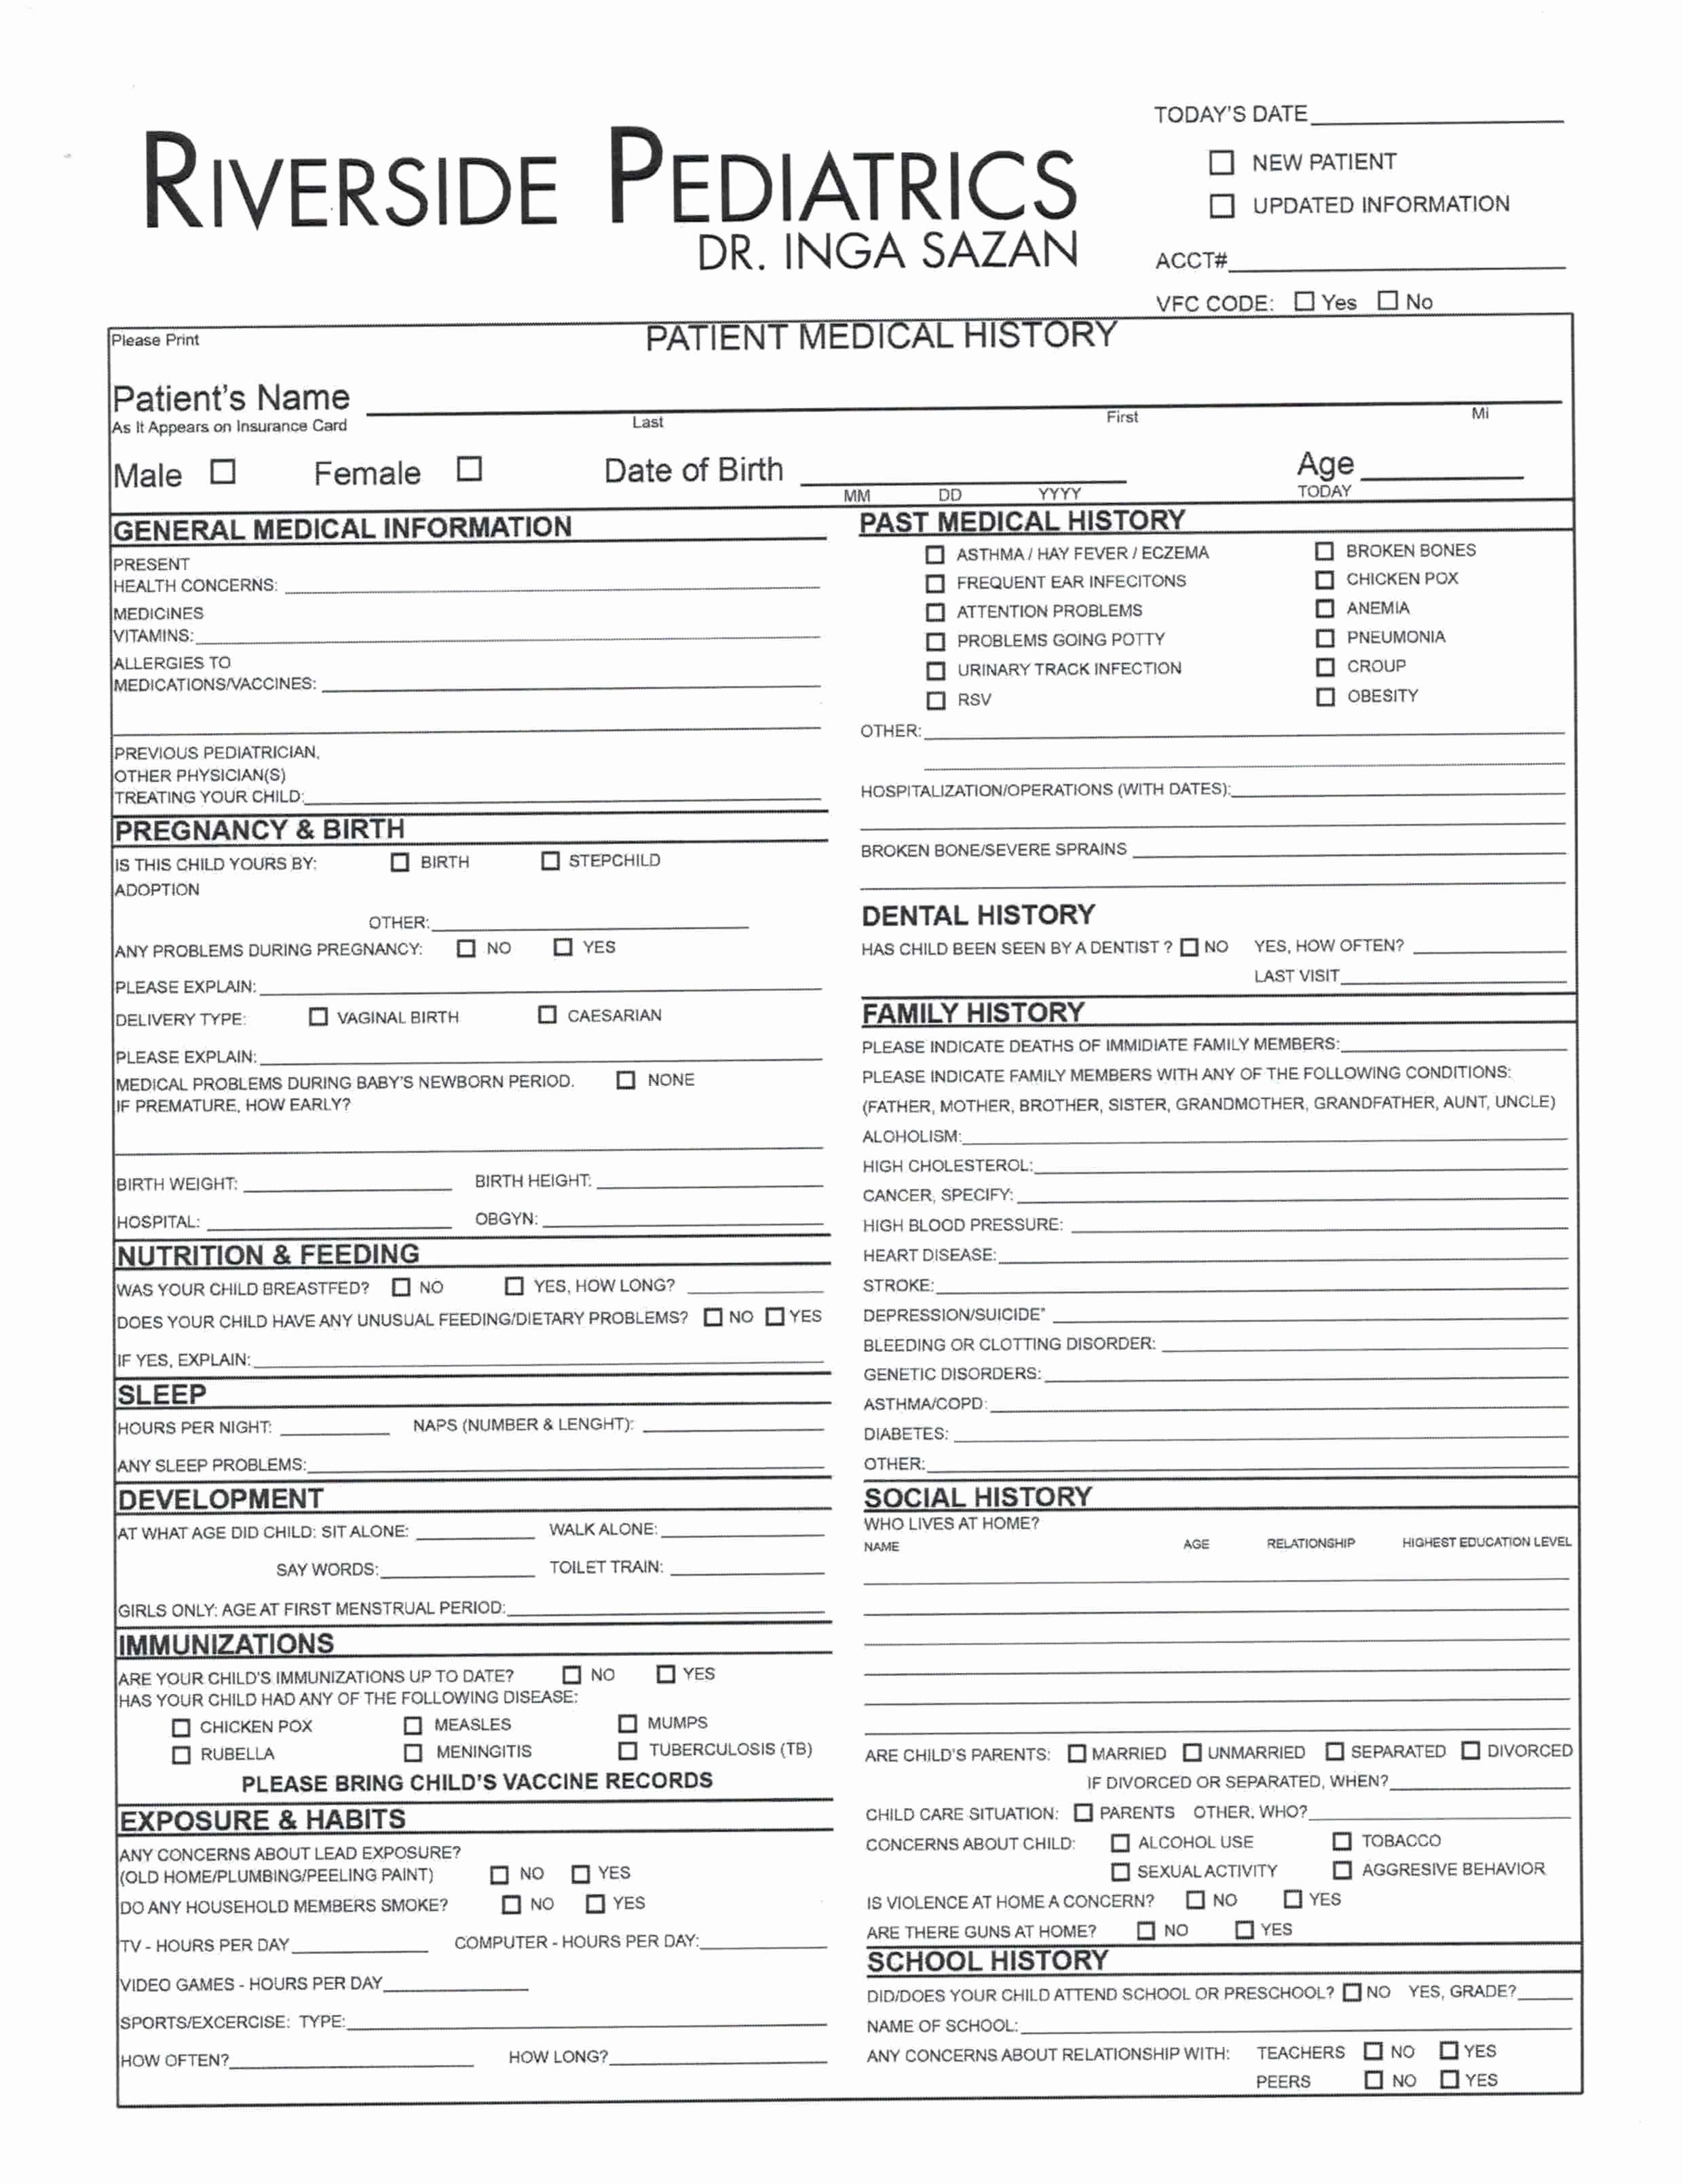 New Patient Health History form Lovely forms Riverside Pediatrics